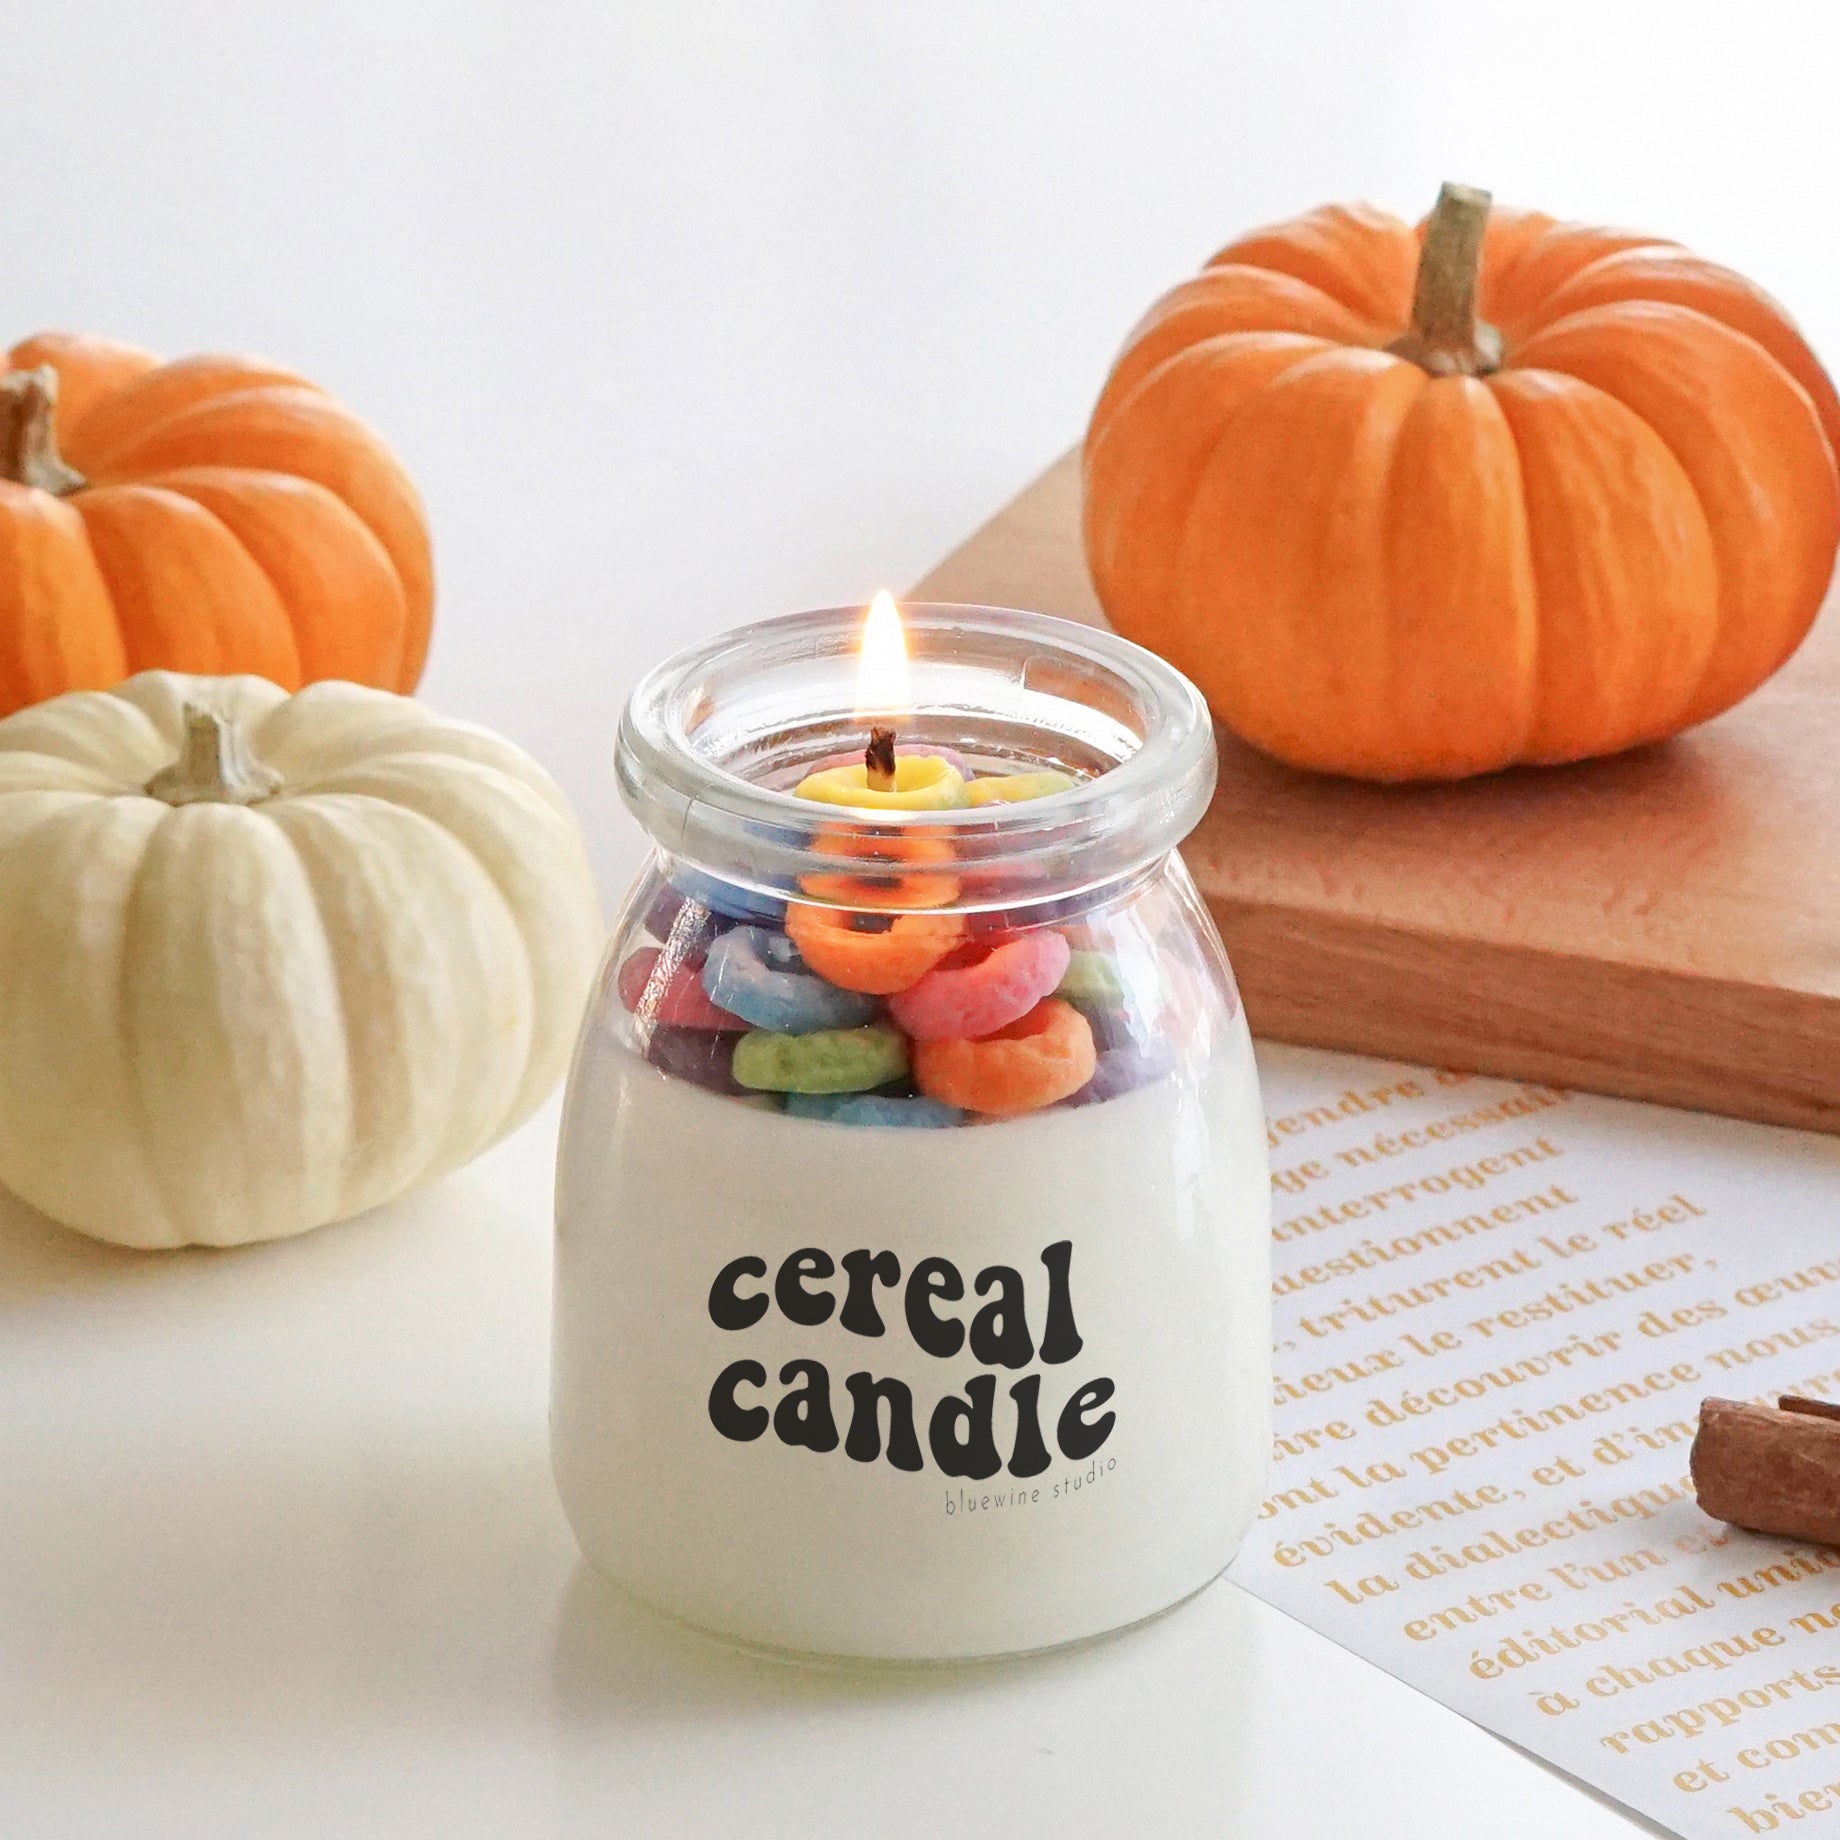 a lit fruit loops cereal candle filled with colorful cereal wax melts, cinnamon sticks, white and orange pumpkins, Ikea mini wood cutting board